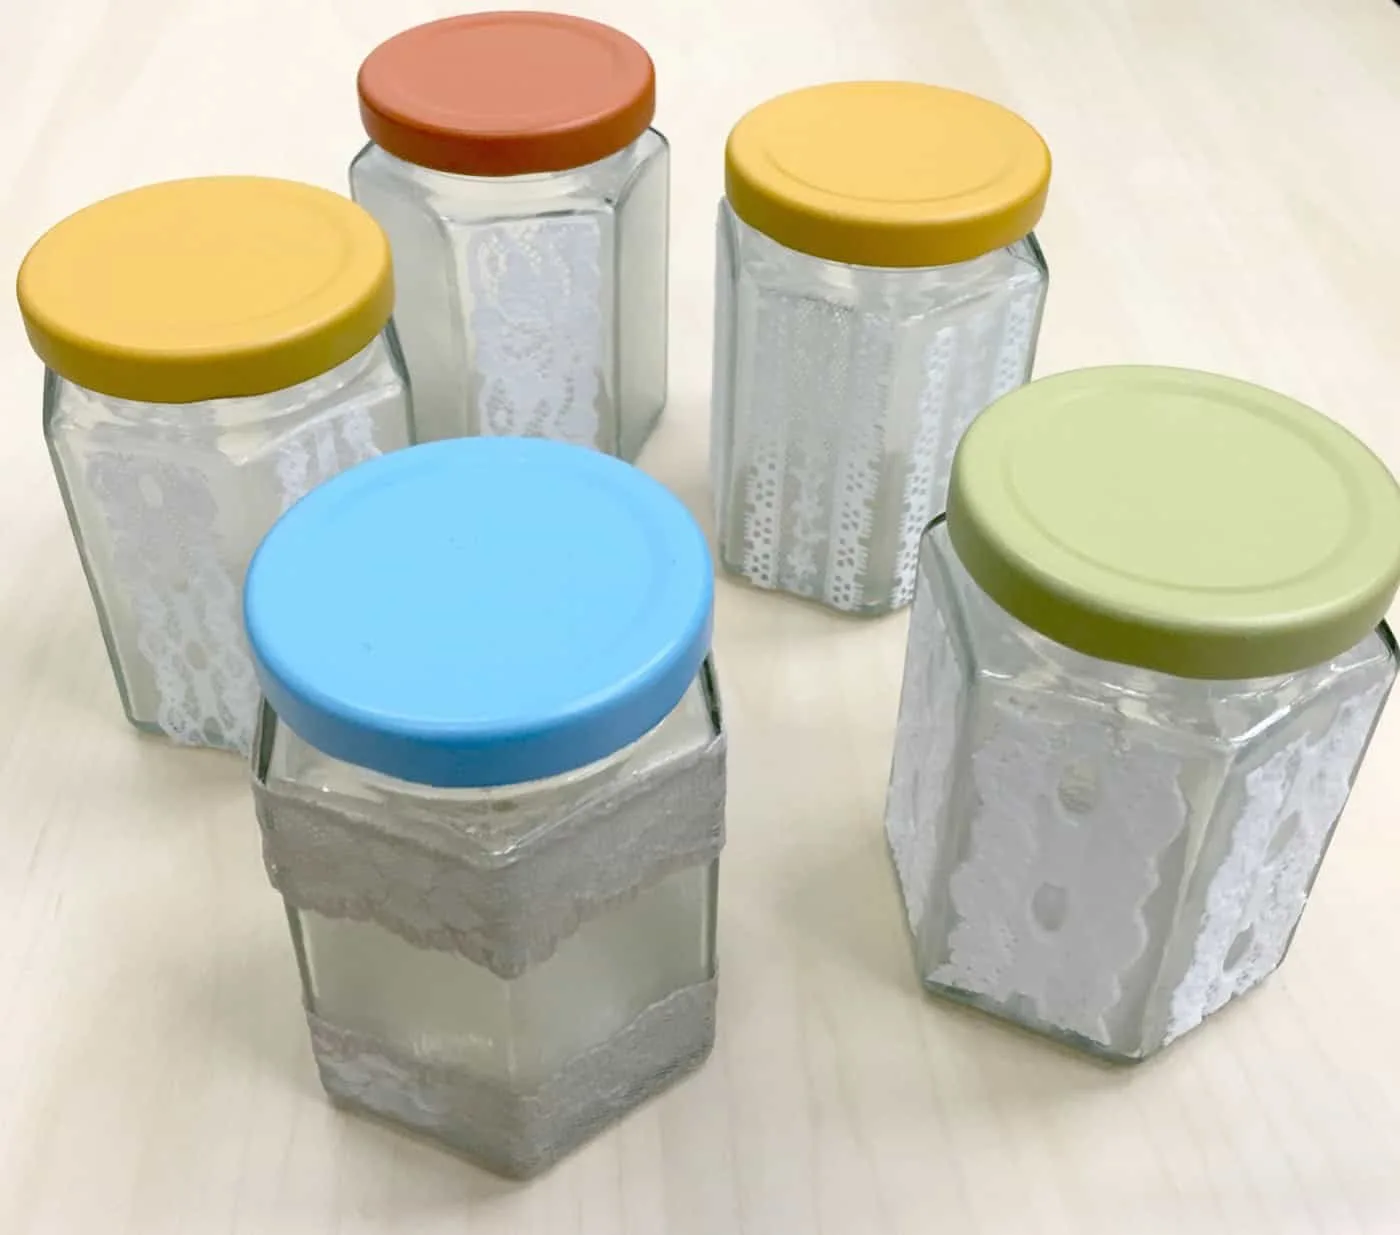 Lace mason jars with spray painted lids